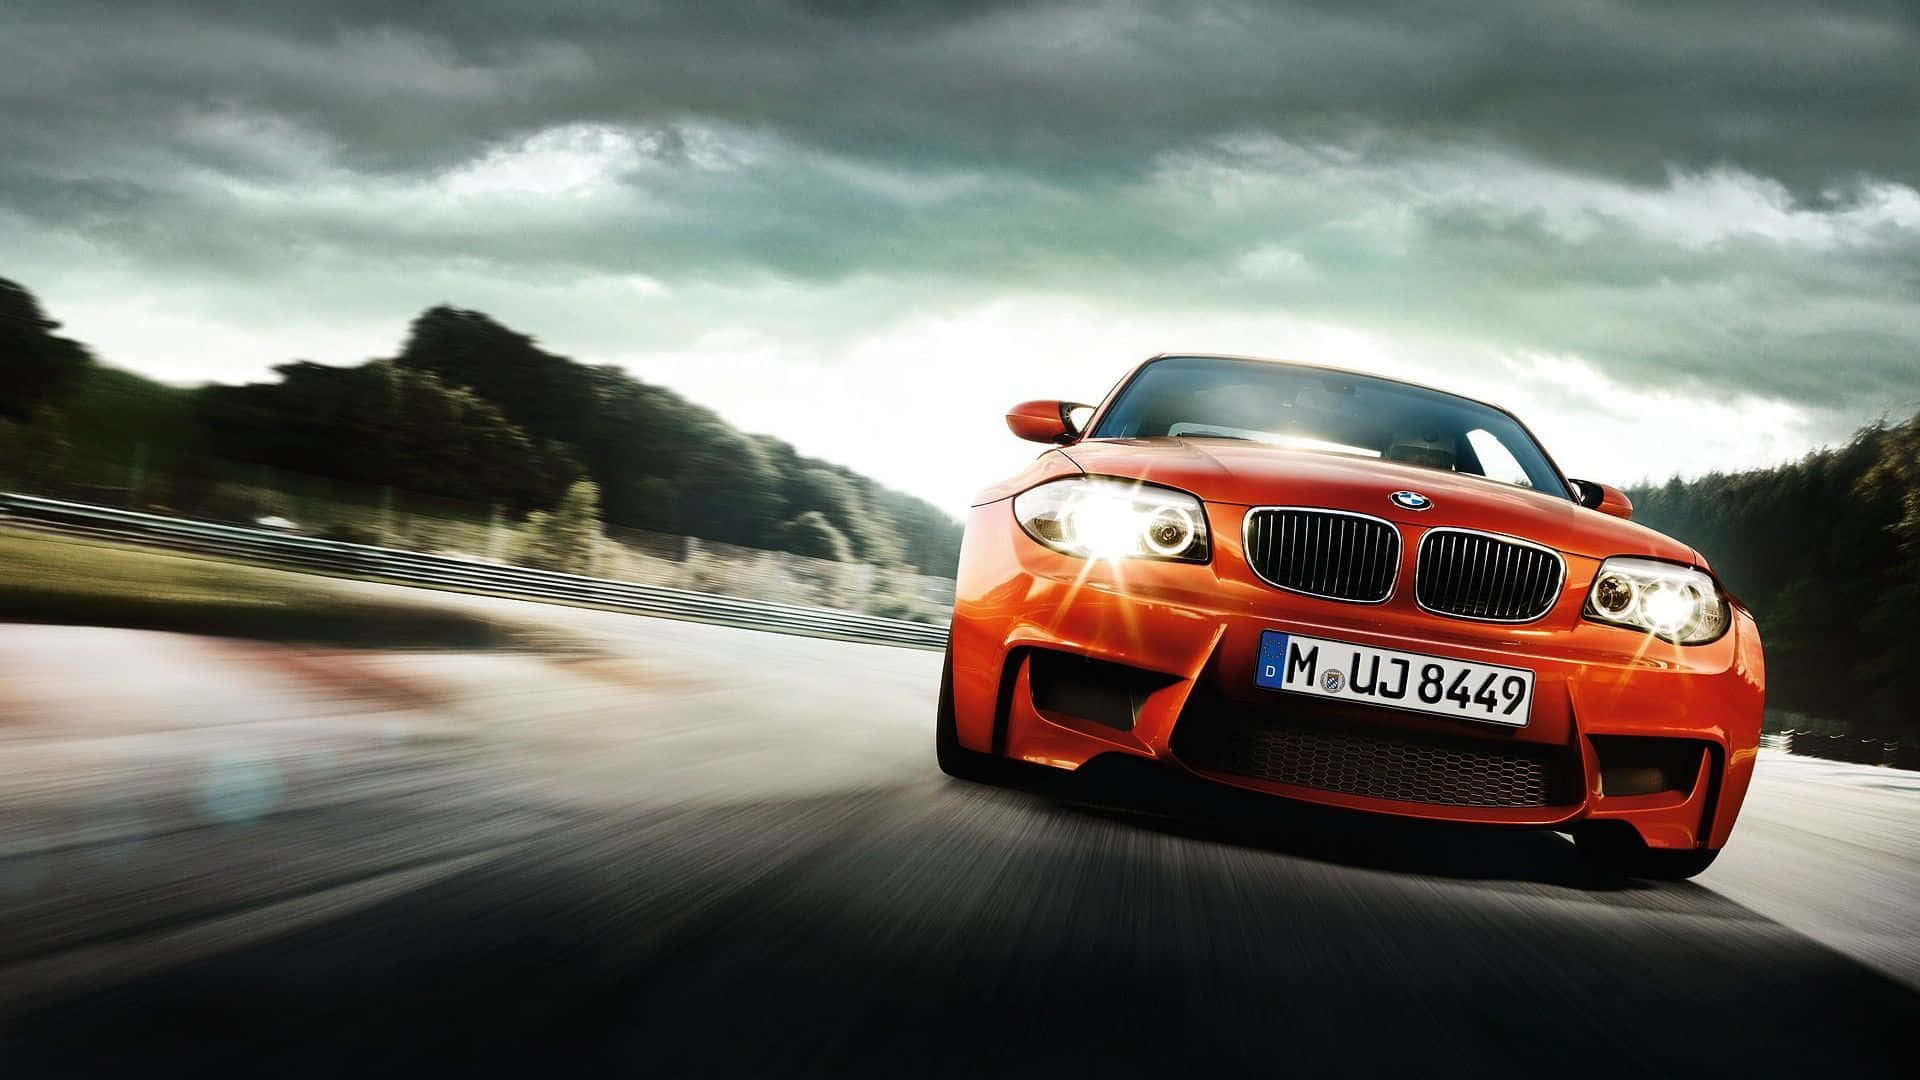 BMW – Delivering luxury and power on the road Wallpaper